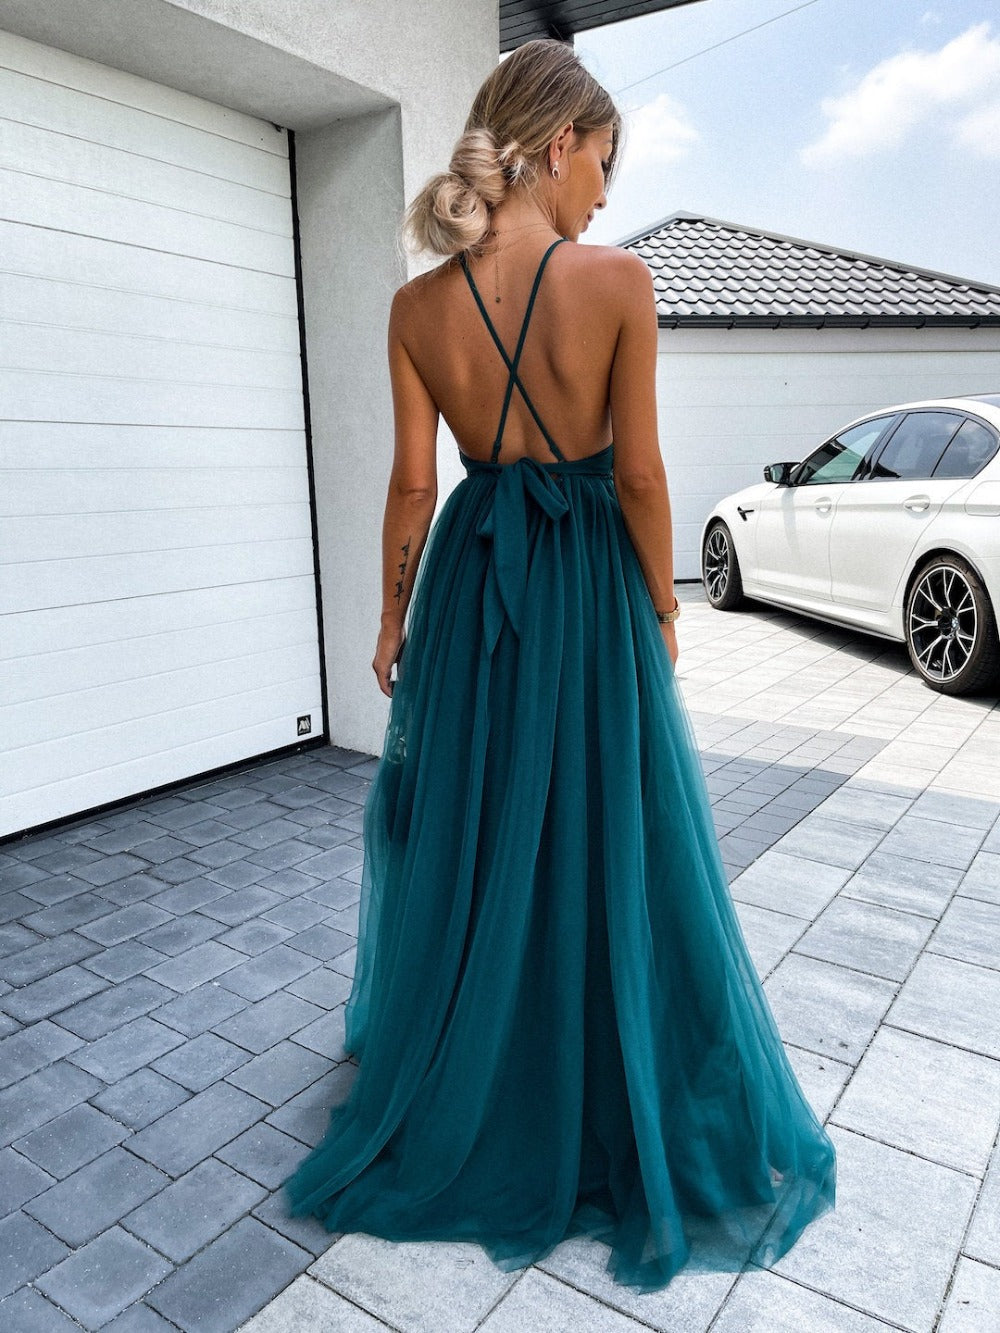 Everyday.Discount buy women gowns dresses pinterest bridal prom galadress instagram nightout gowns dresses tiktok videos facebookwomen ankle length see through straps sleeveless partydress women's formal dresses cocktaildress partydresses formal parties galas weddings elegance featuring luxurious fabrics intricate designed gown cocktaildress